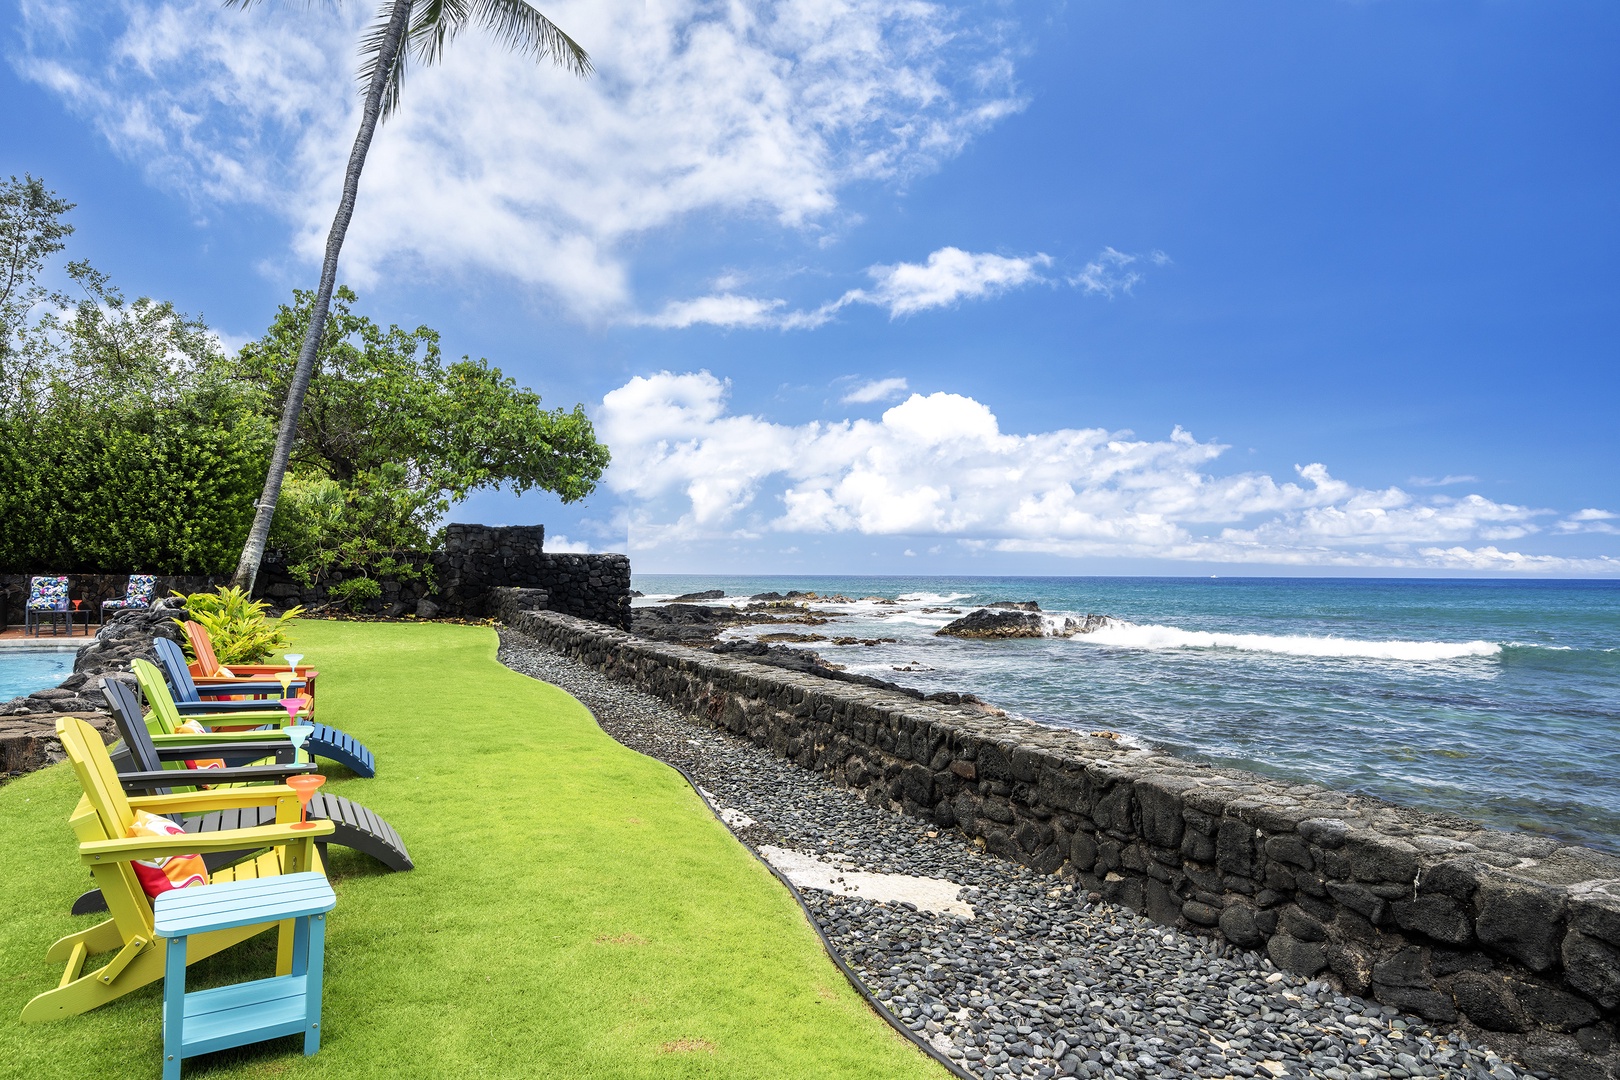 Kailua Kona Vacation Rentals, Hale Pua - Lush yard offers a great place for activities!